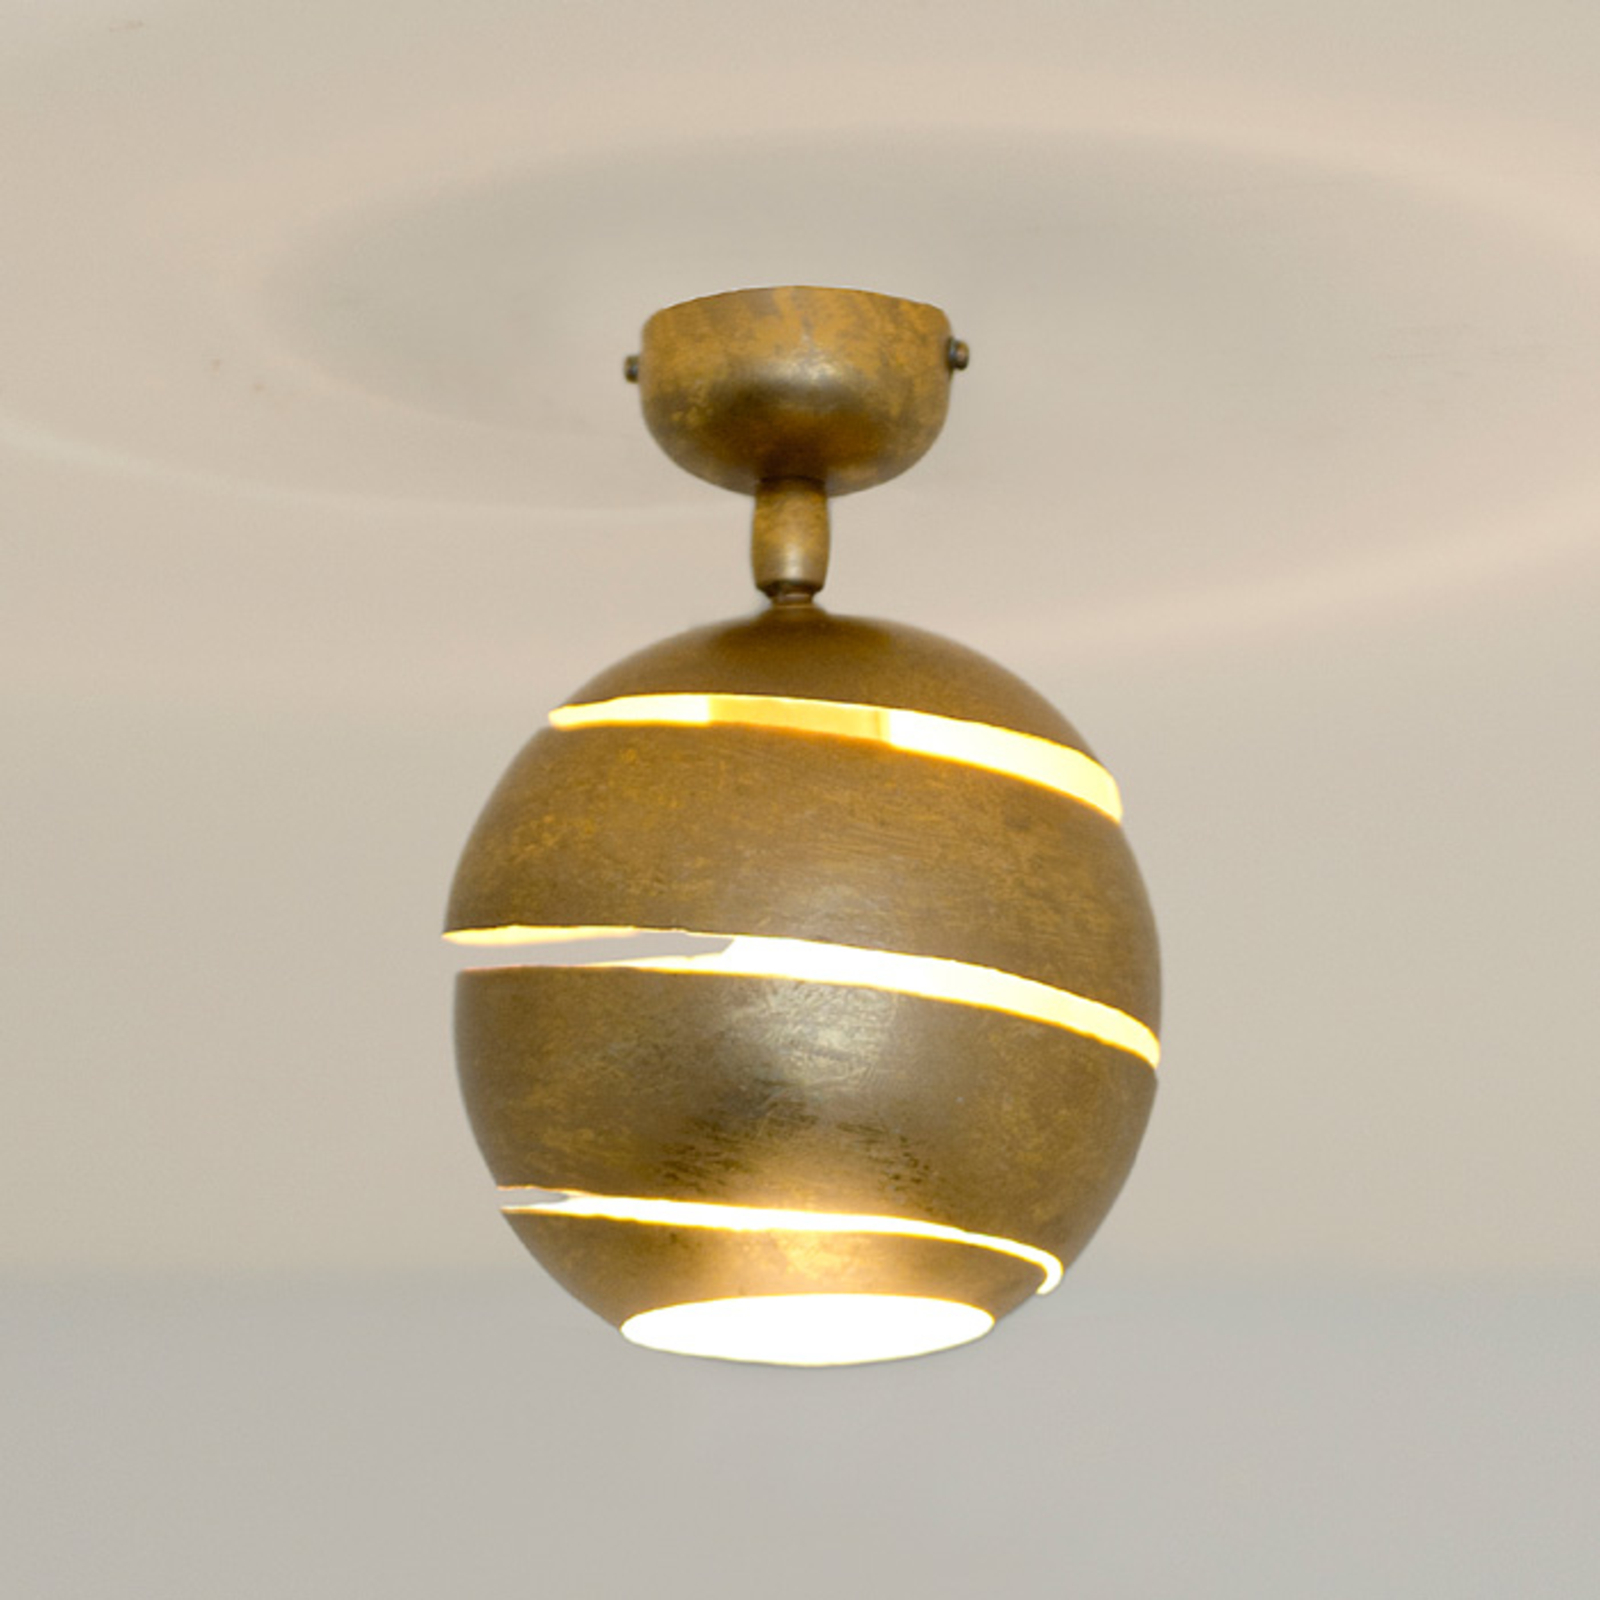 Pivotable ceiling light Suopare in gold